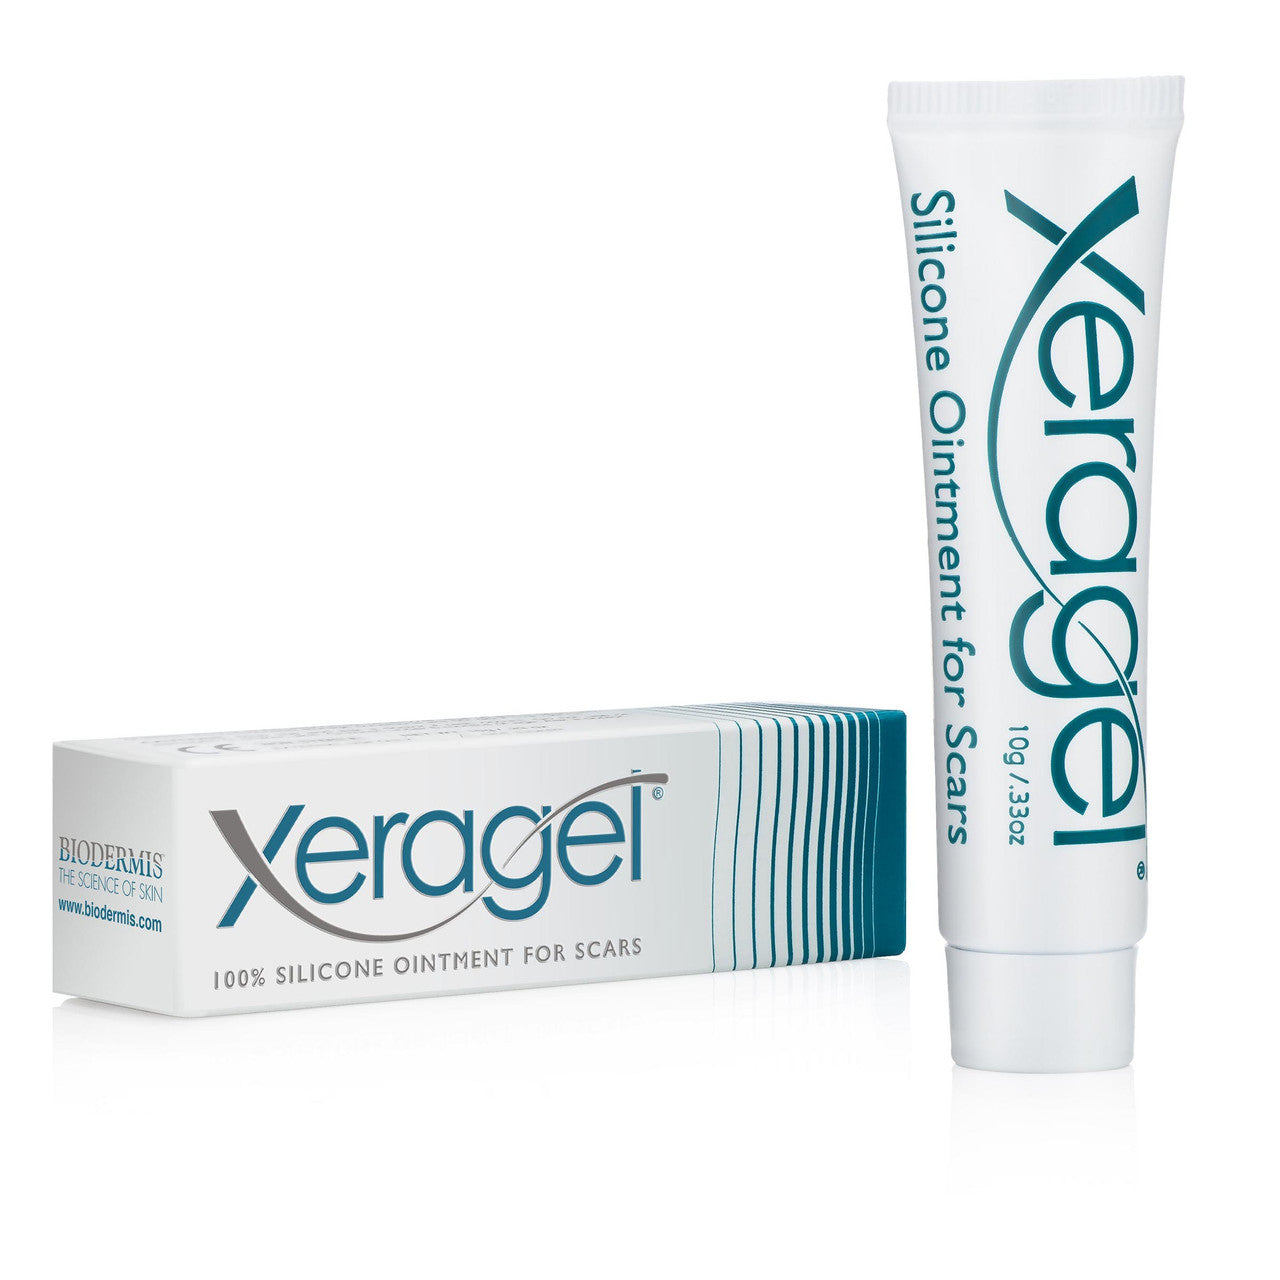 Xeragel Silicone Ointment